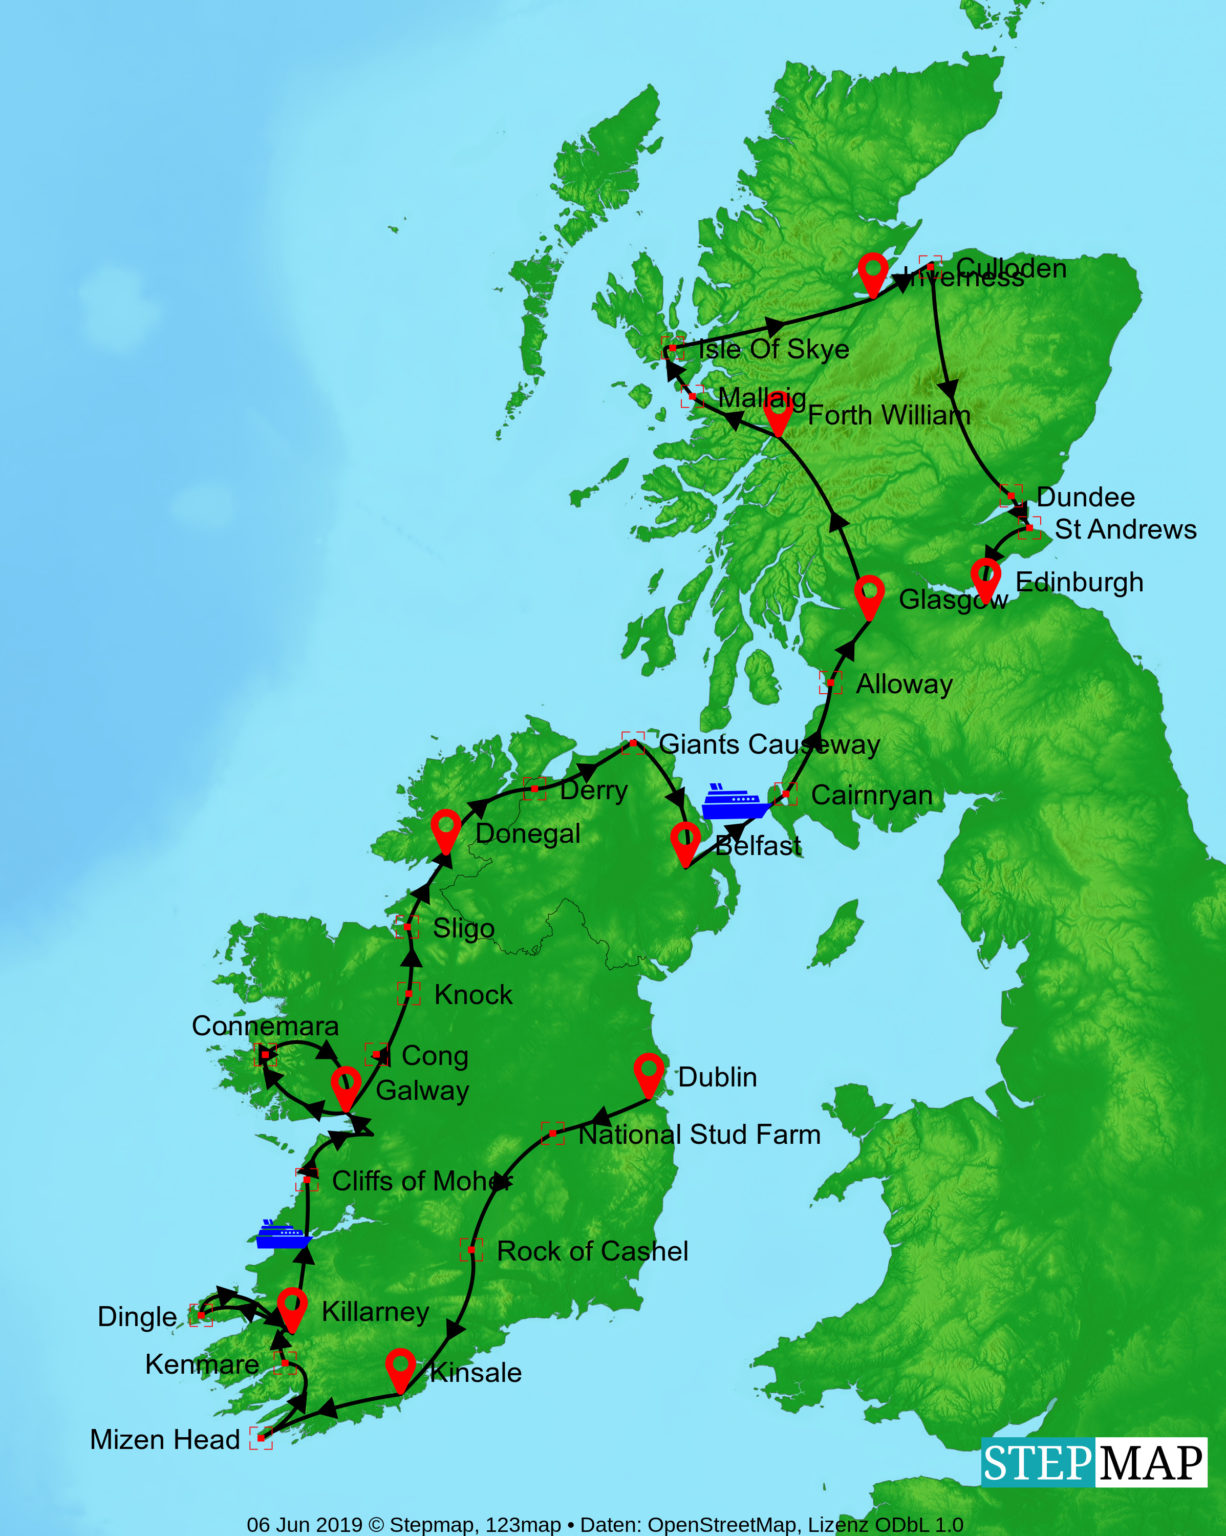 14 day driving tour of ireland